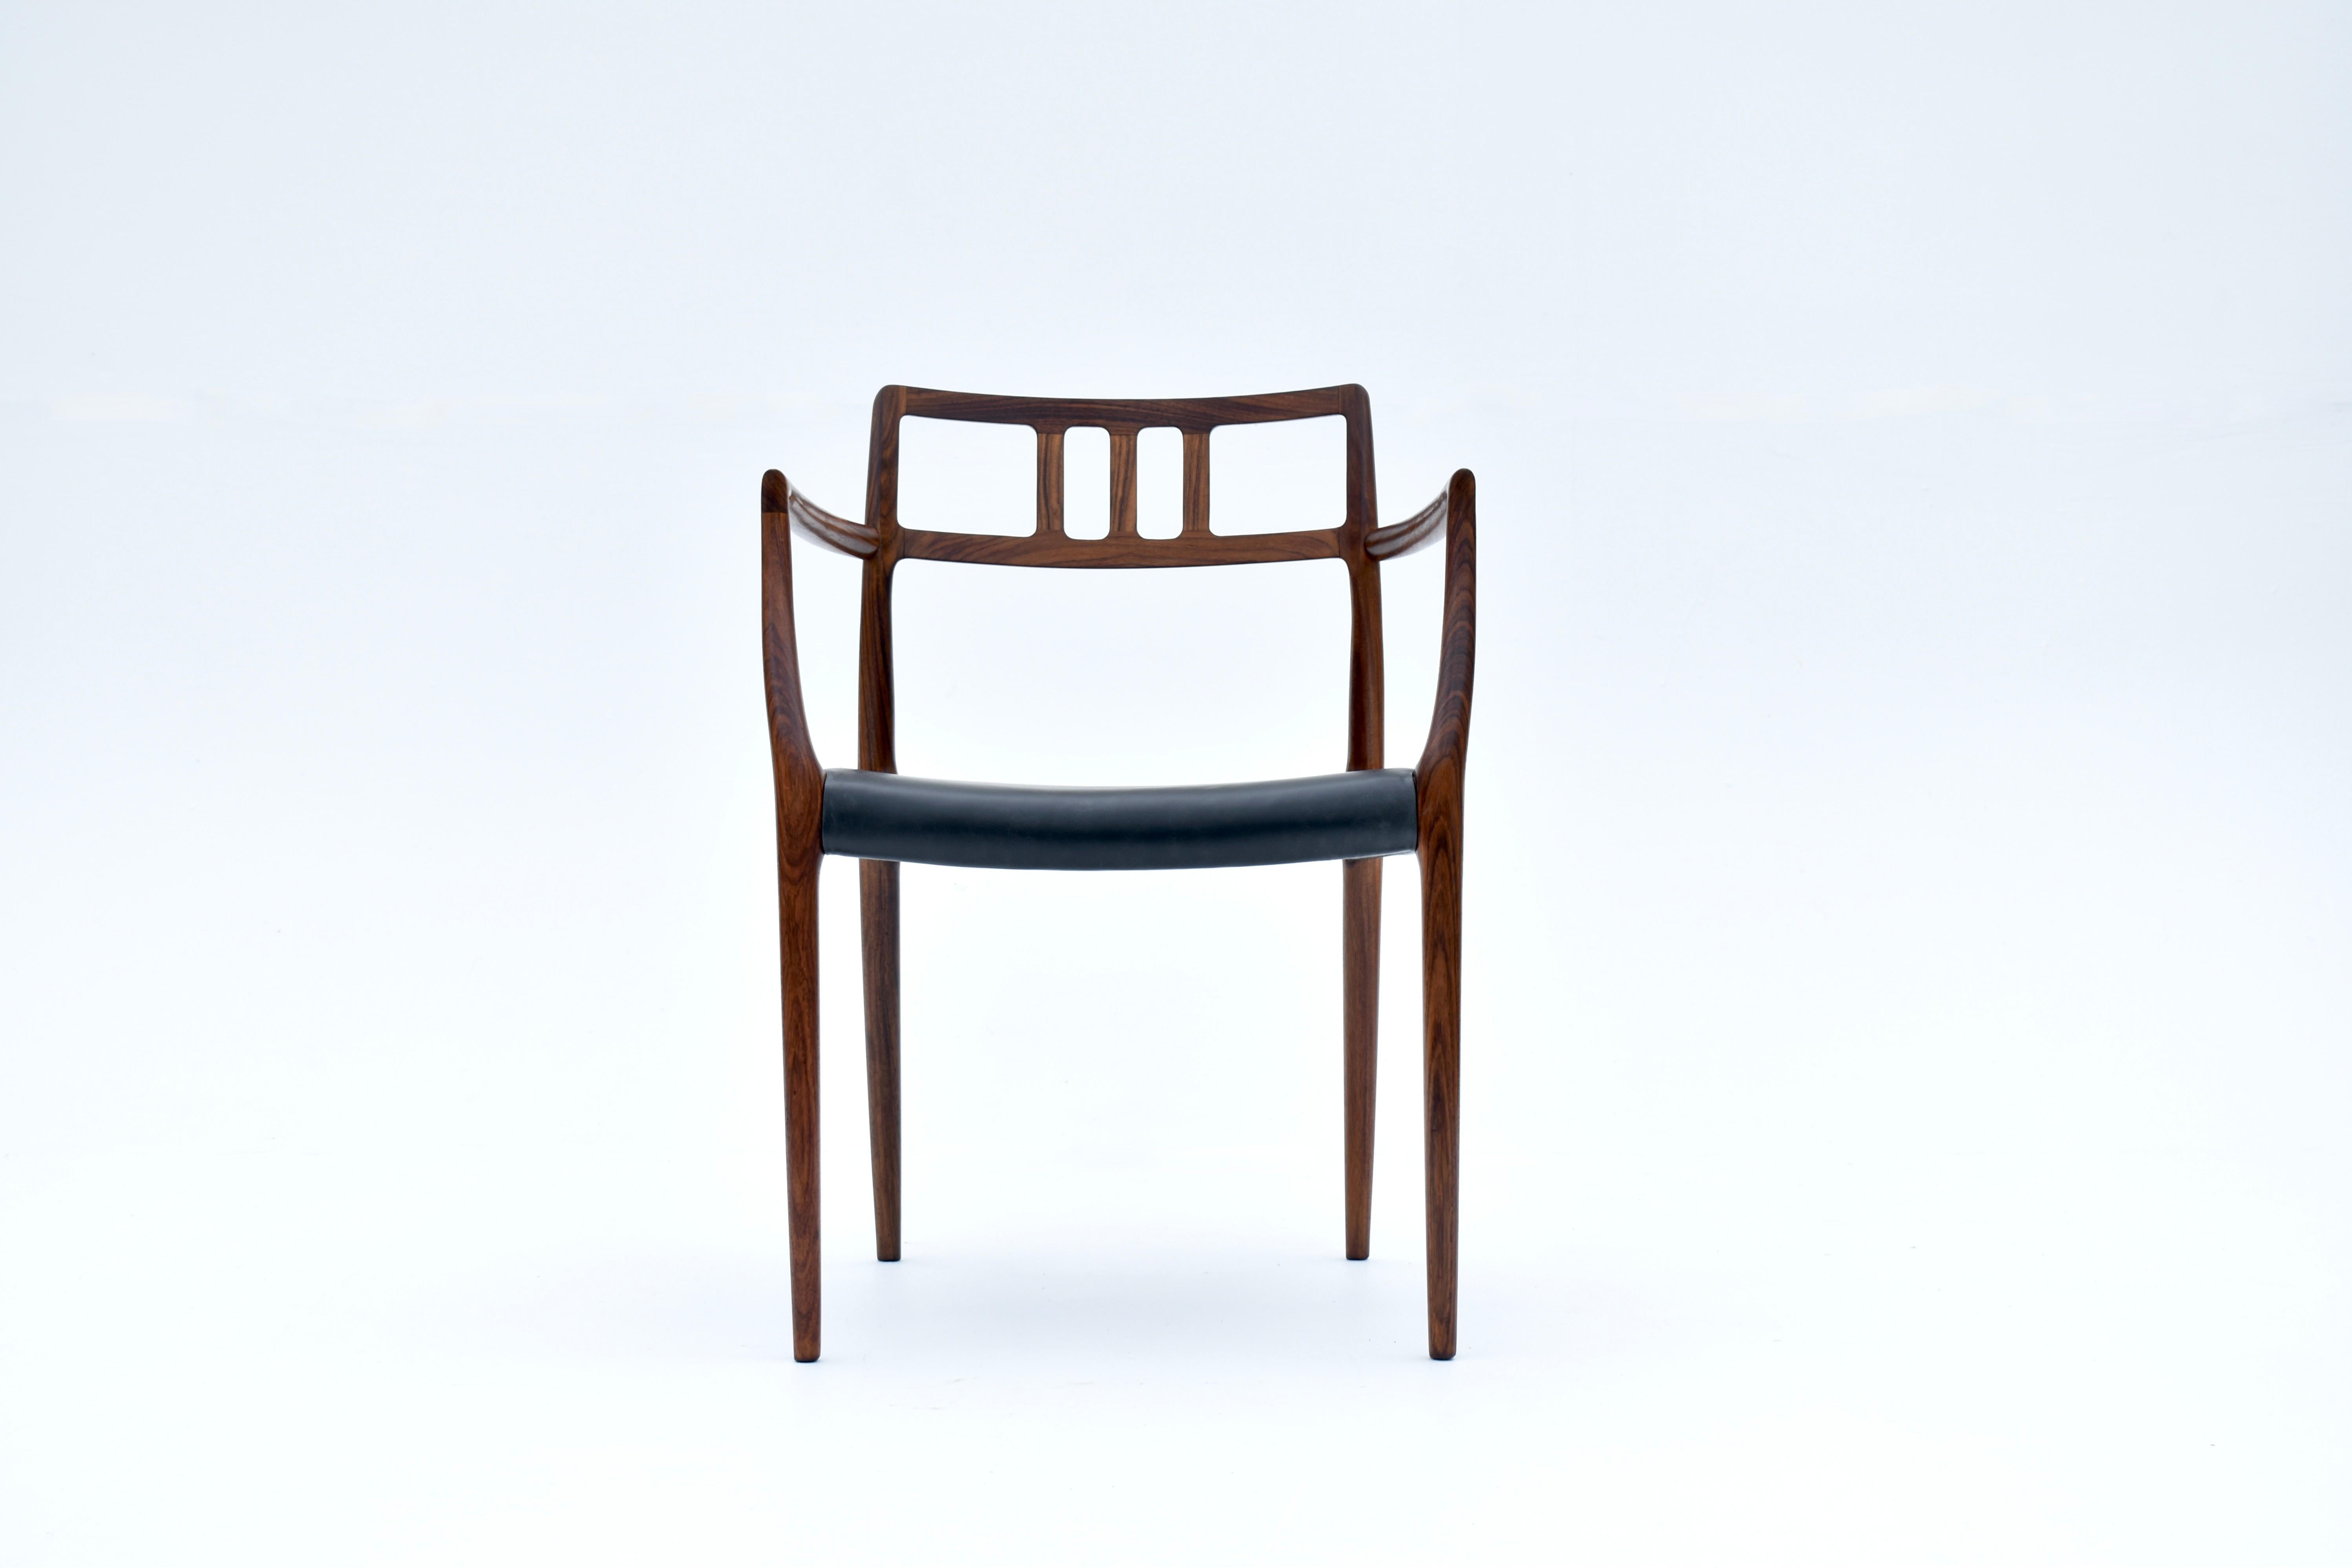 Solid Rosewood and black leather armchair designed by Niels Moller in 1966 for J L Mollers Mobelfabrik.

A highly sought after and rarely seen chair. A Danish design Classic, this design is a showcase for the craftsmanship and and fastidious